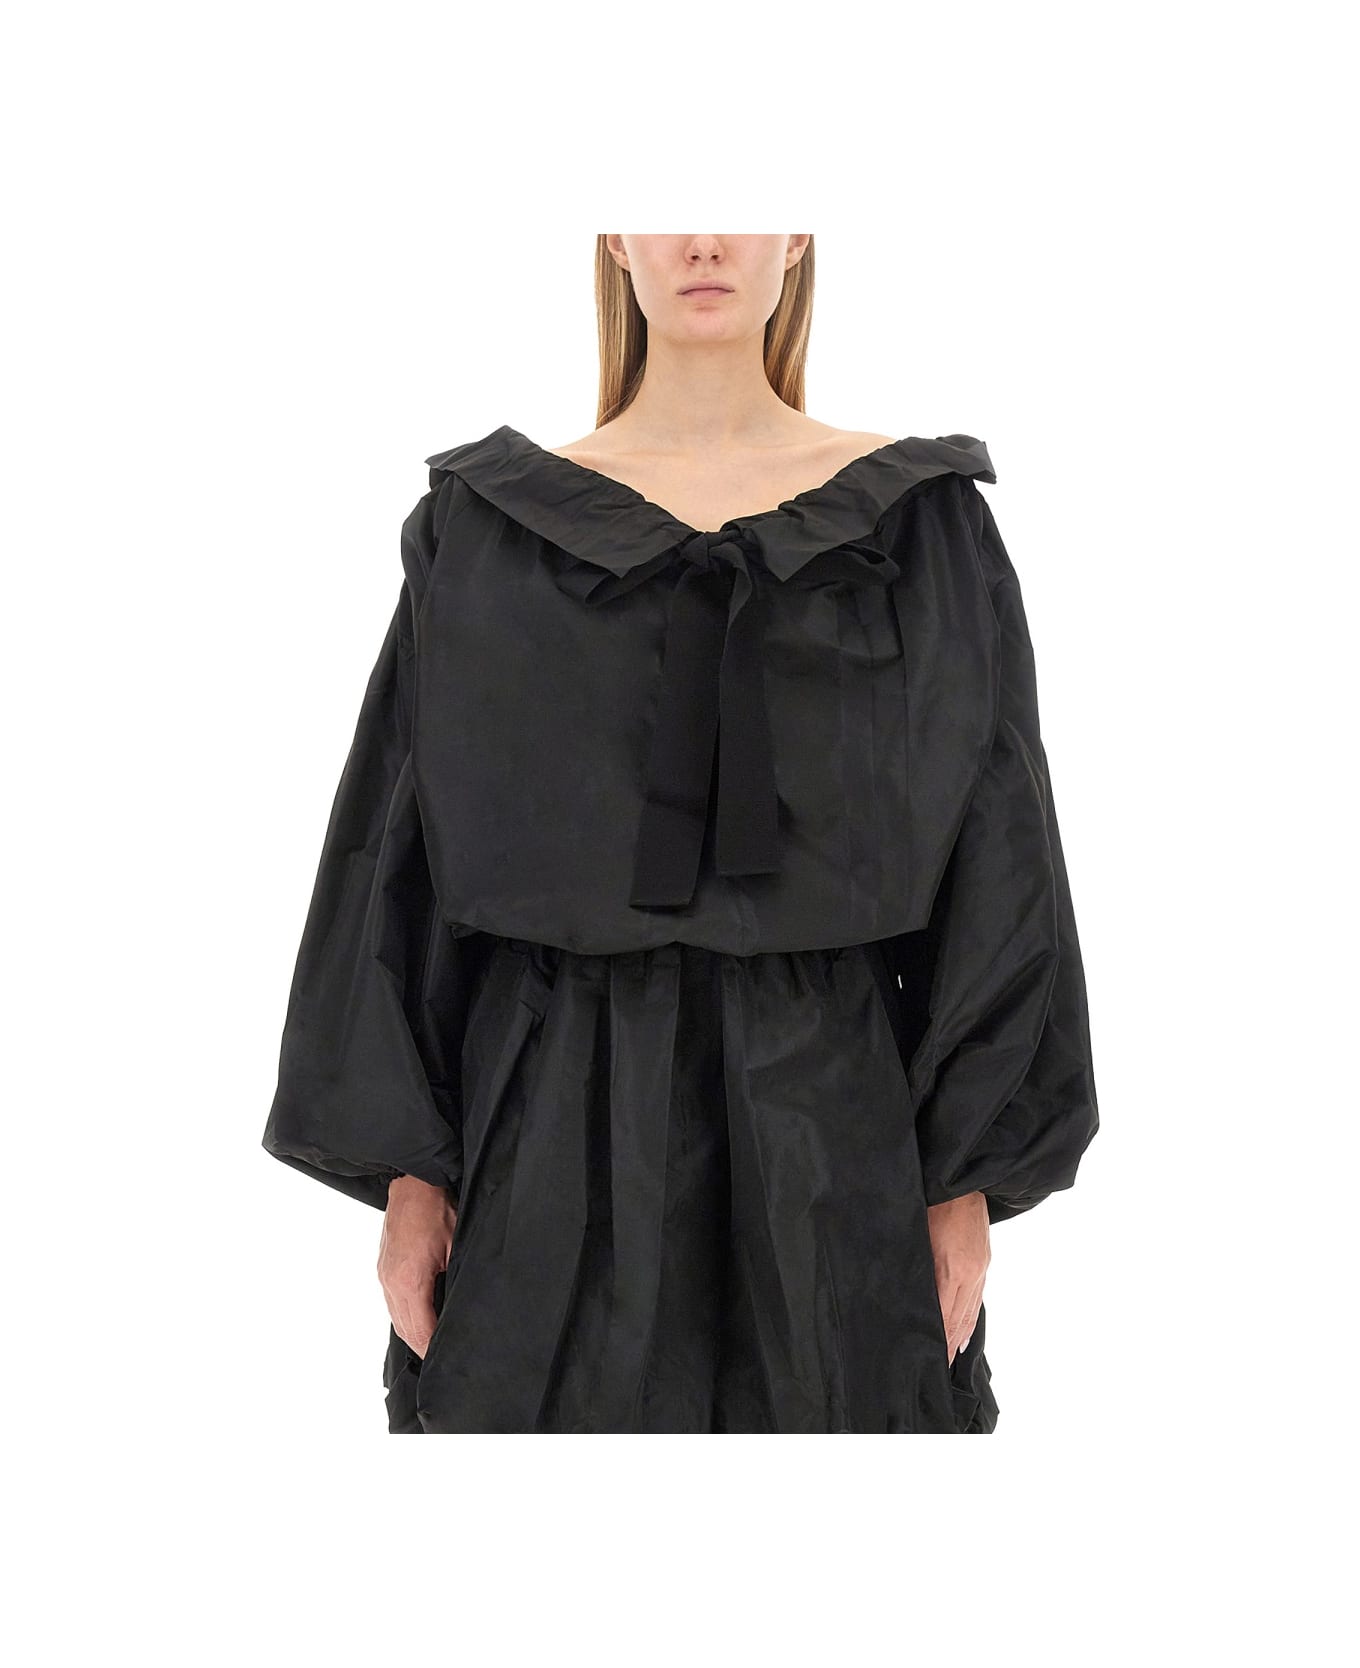 Patou Top With Balloon Sleeves - BLACK